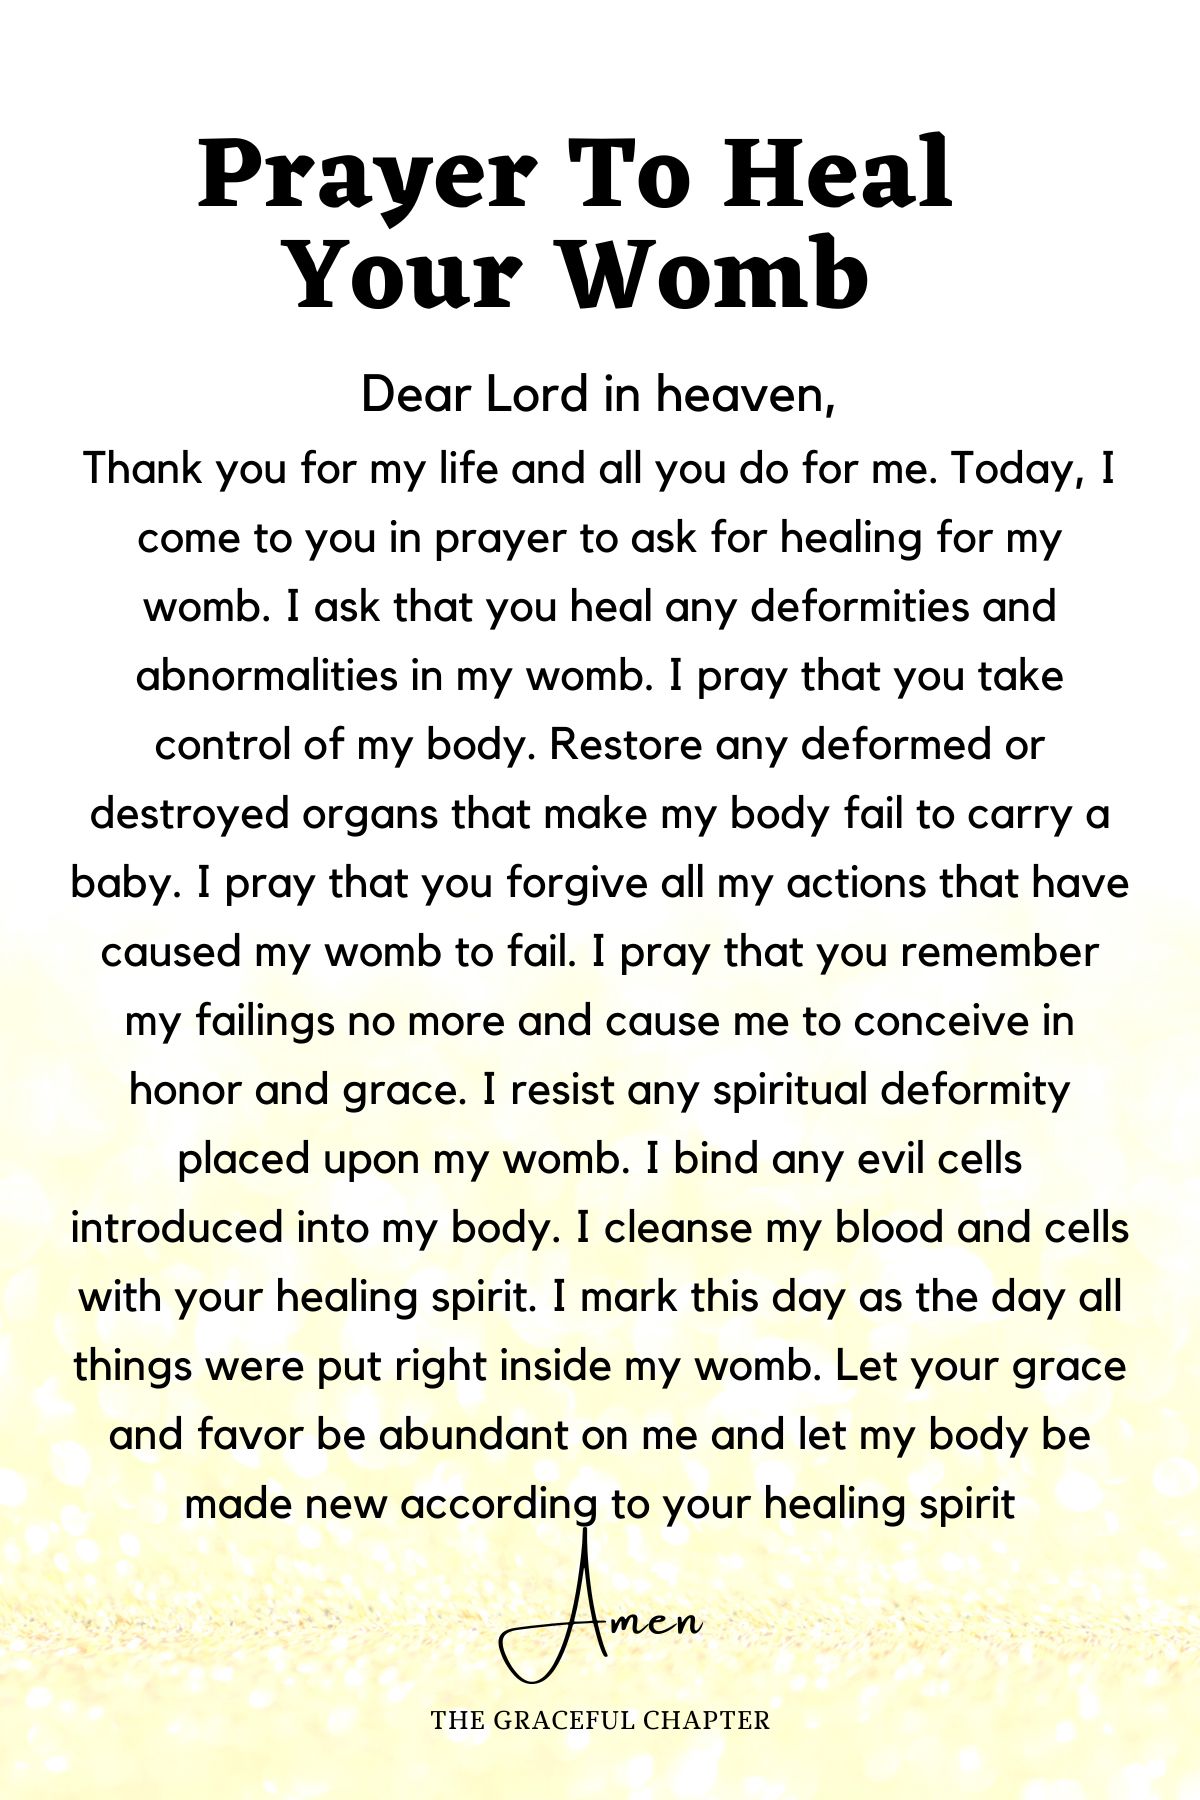 Prayer to heal your womb - Prayers For The Fruit Of The Womb